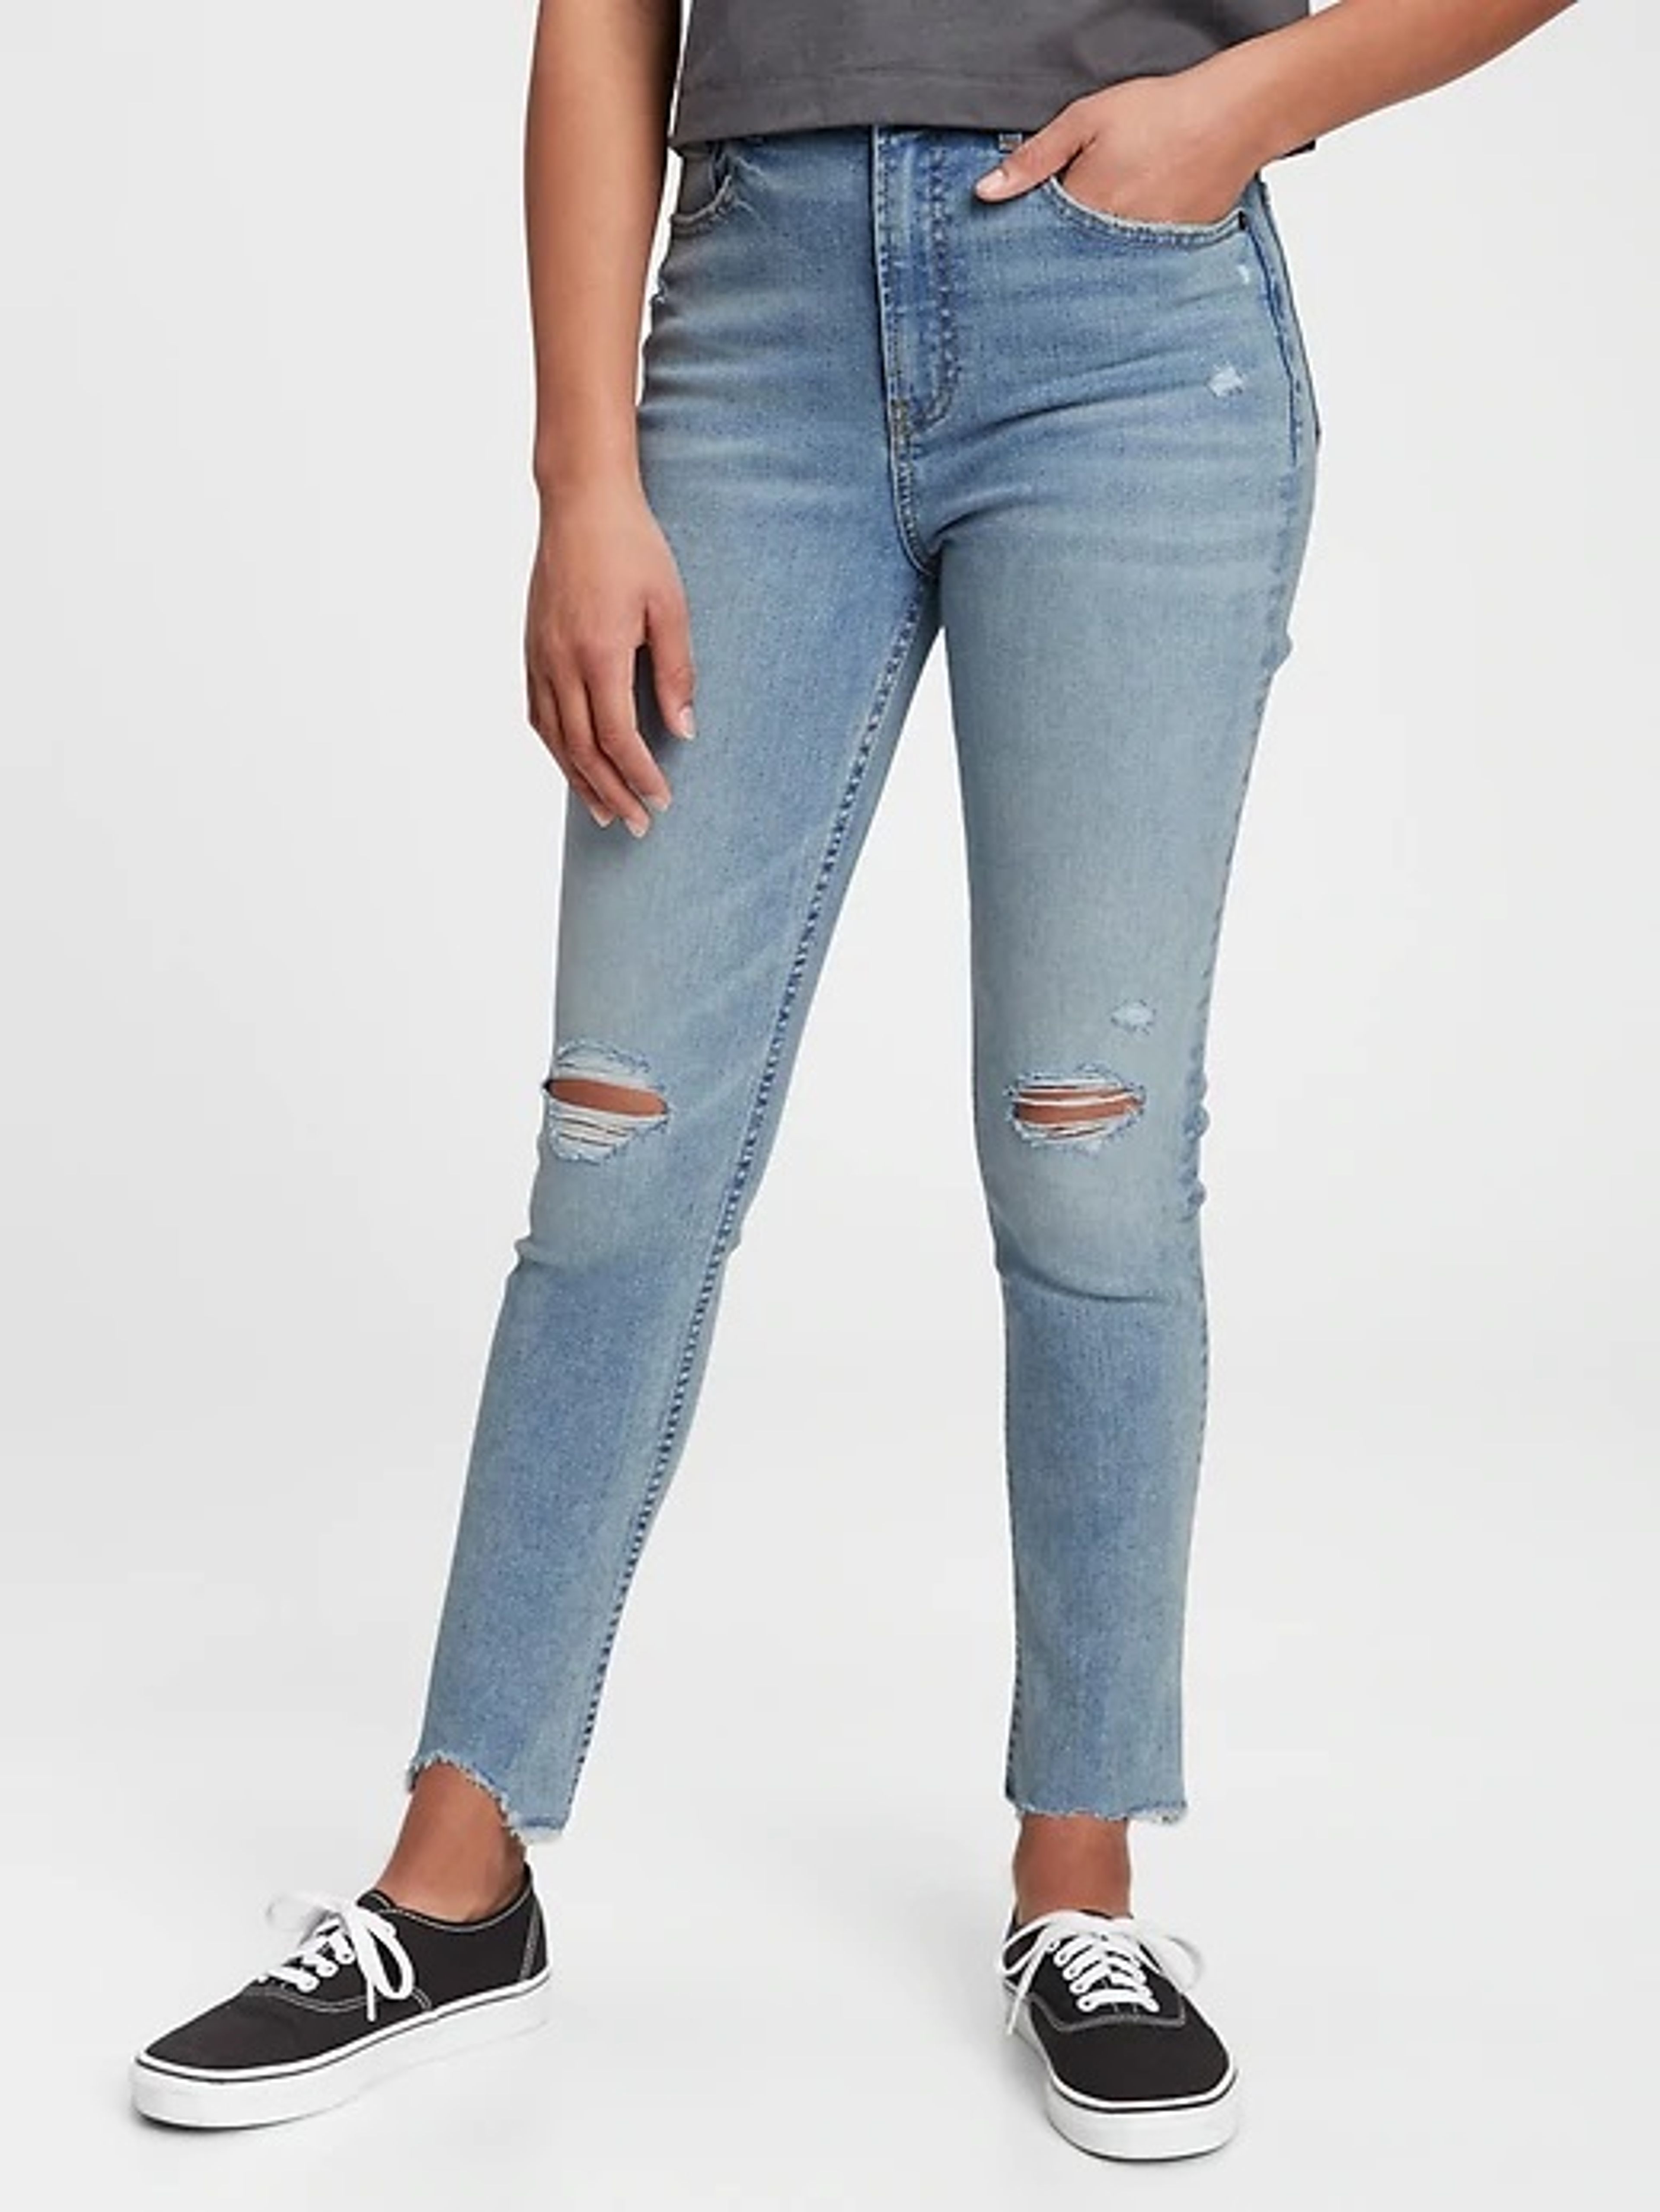 Teen Jeans sky high rise skinny ankle